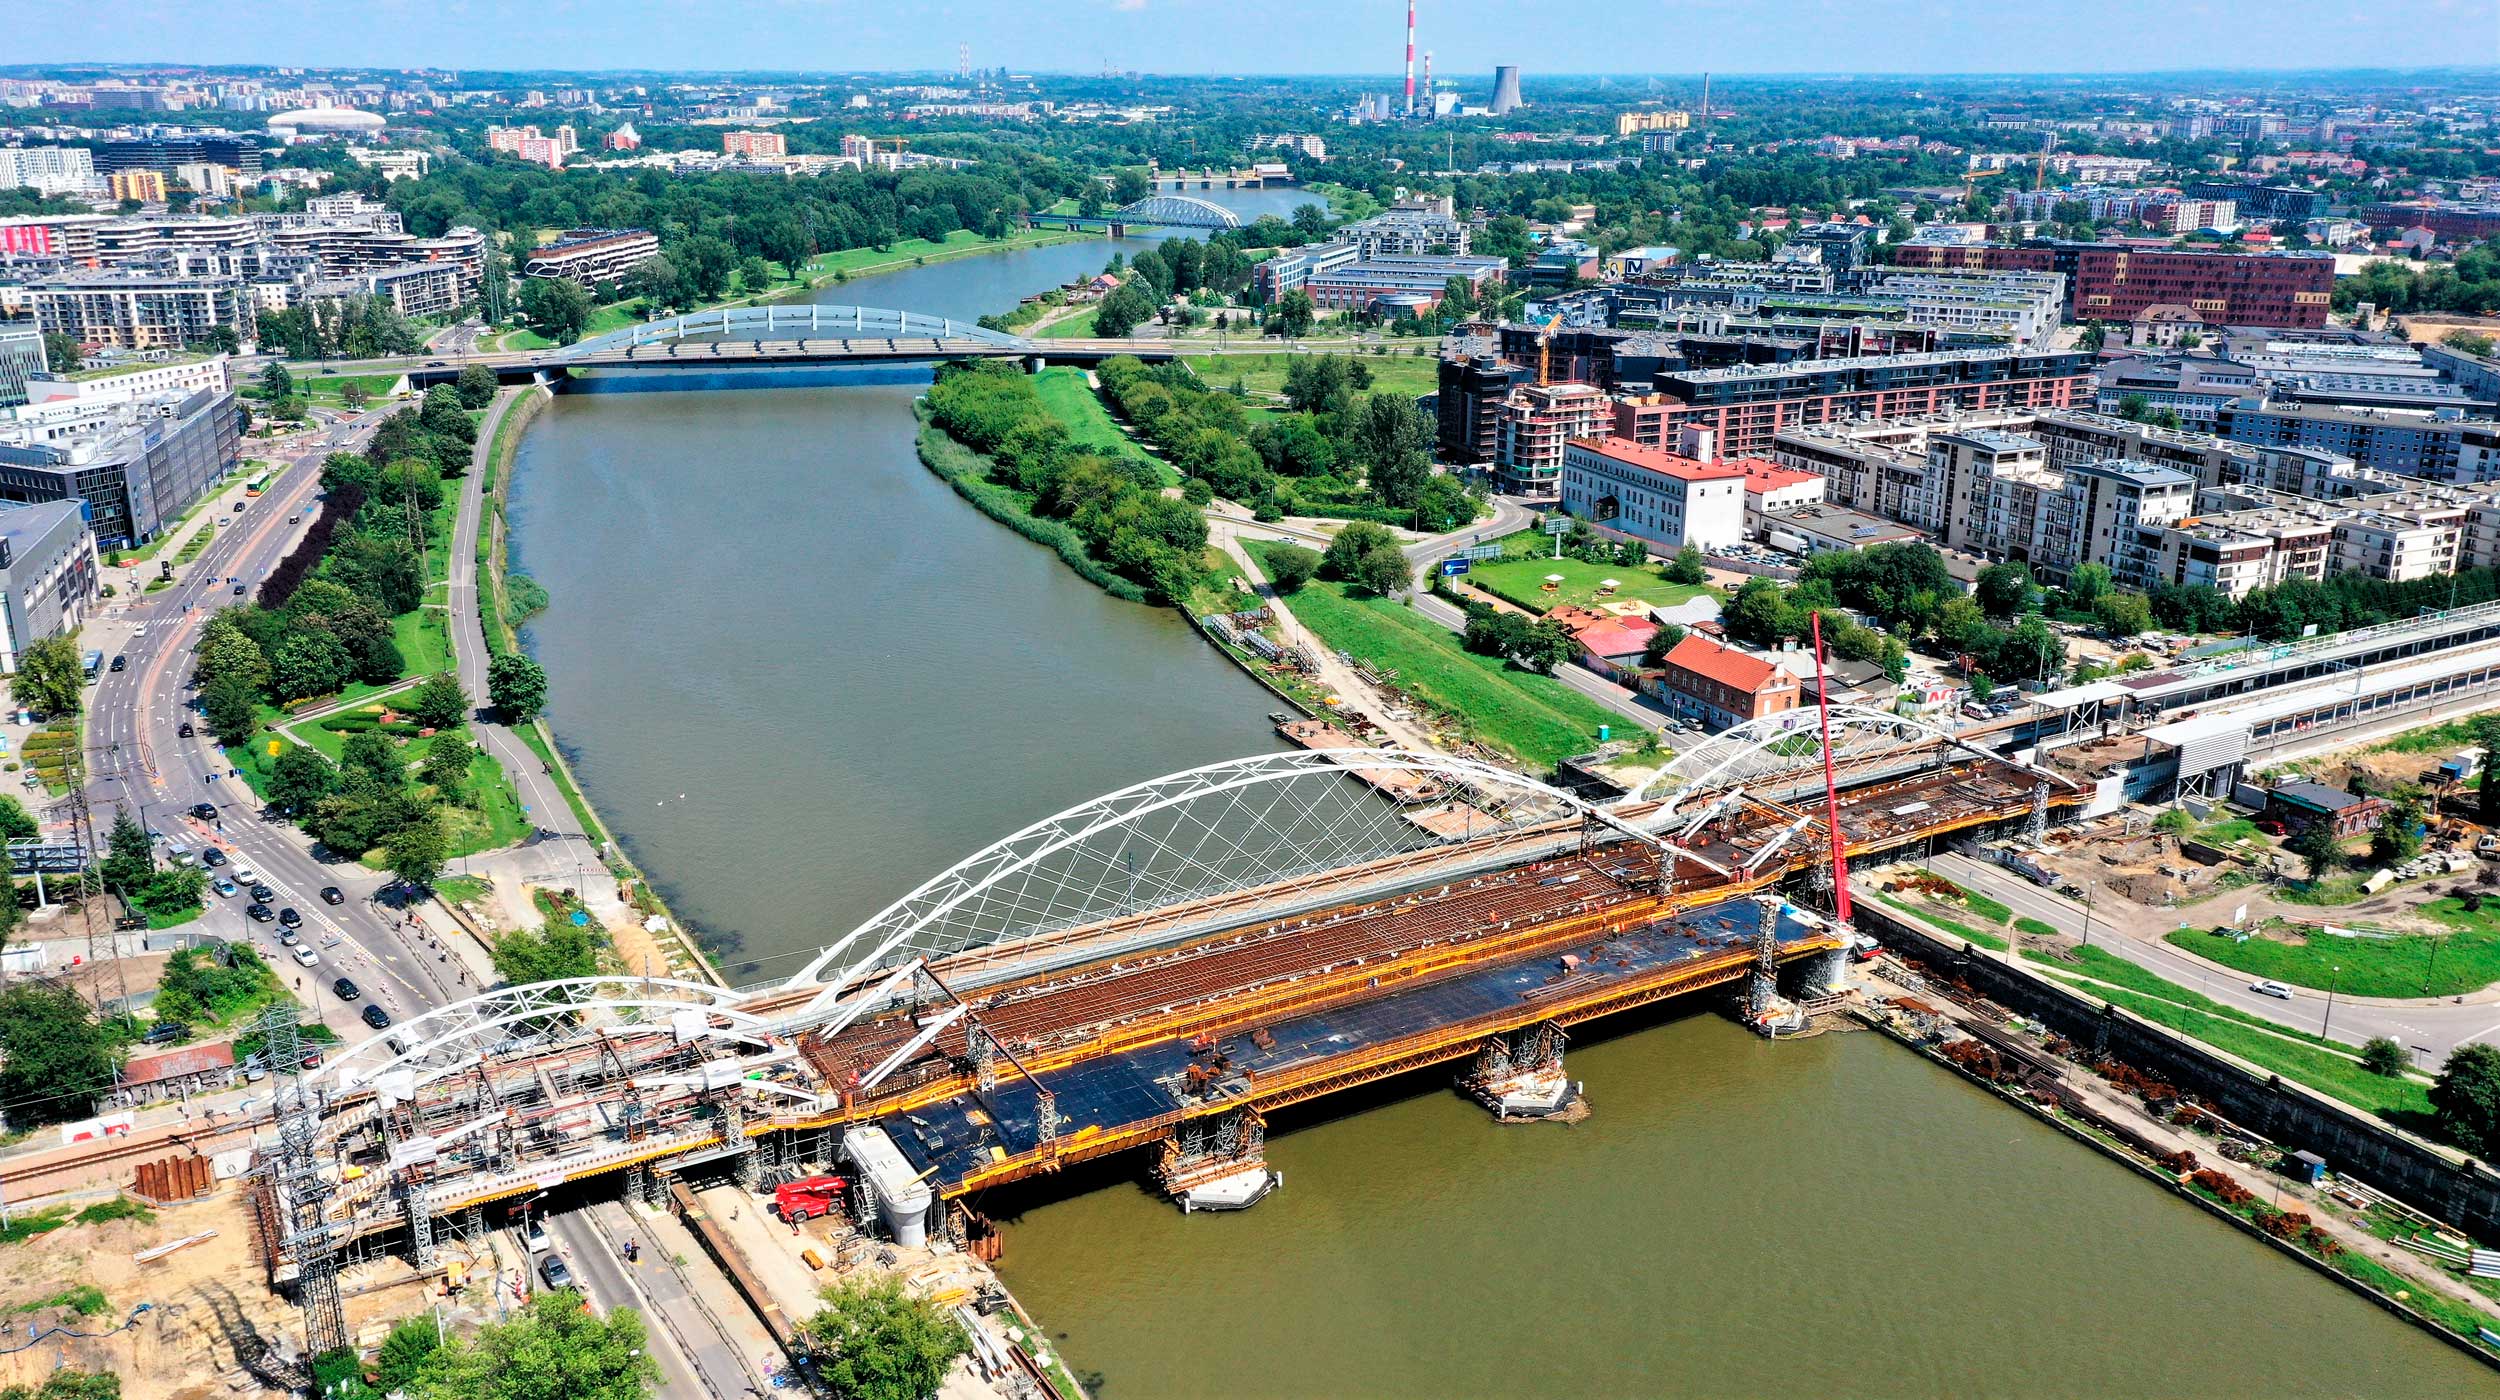 Two new bridges over the Vistula are under construction in Kraków: the M1 and M3. These two new railway bridges in Kraków are part of the project entitled "Works on the E30 railway line, Kraków Główny Towarowy-Rudzice section, including the construction of metropolitan line tracks".